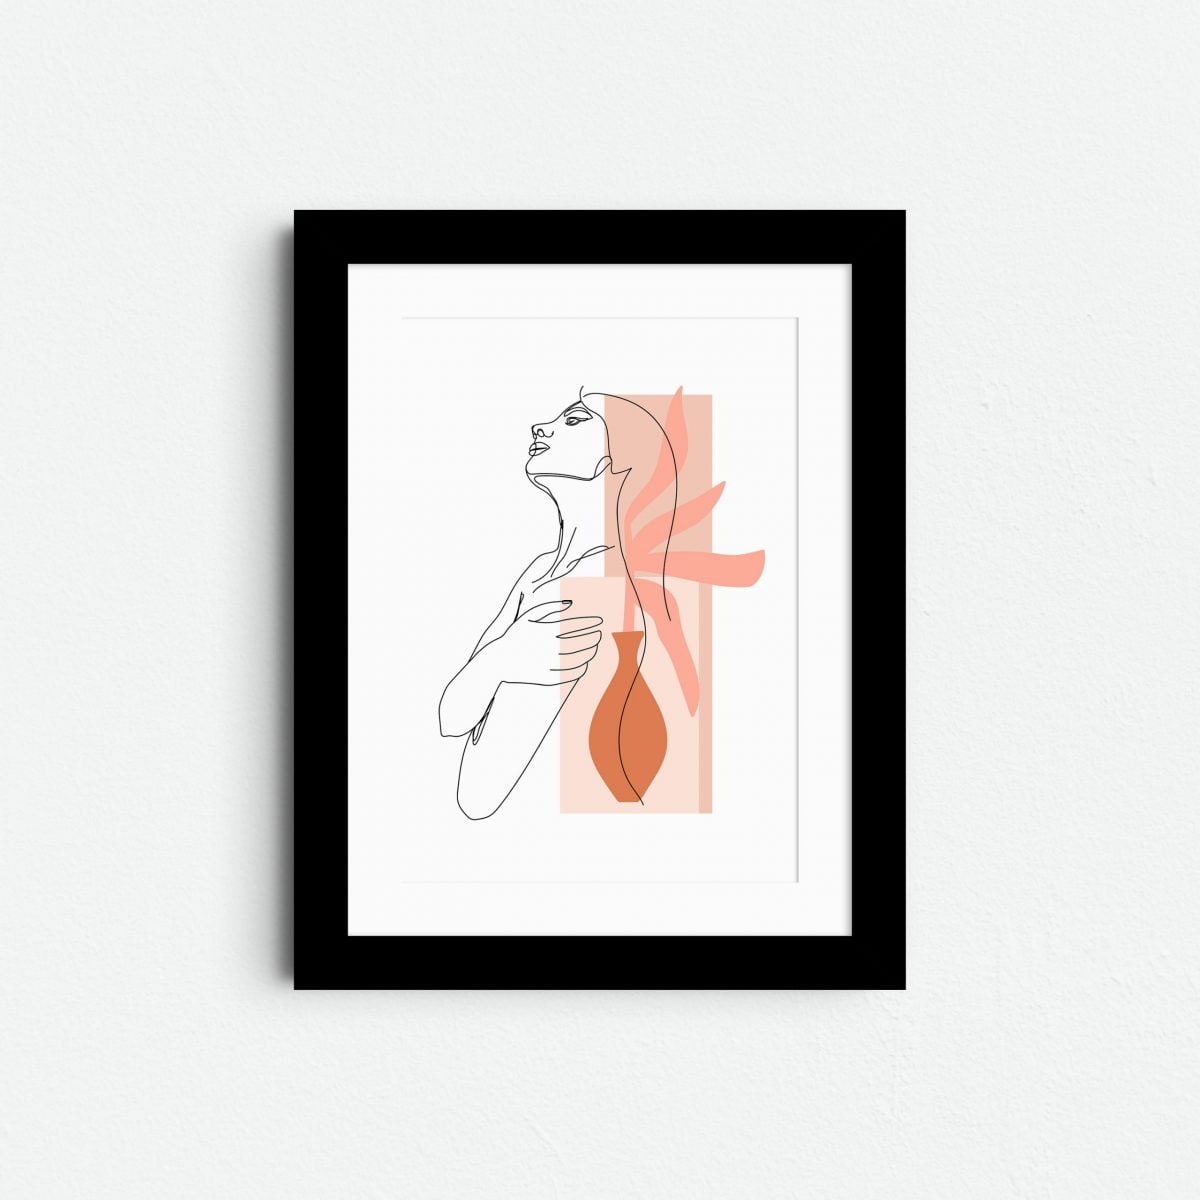 thirsty-nude-erotic-wall-art-prints-framed-portrait